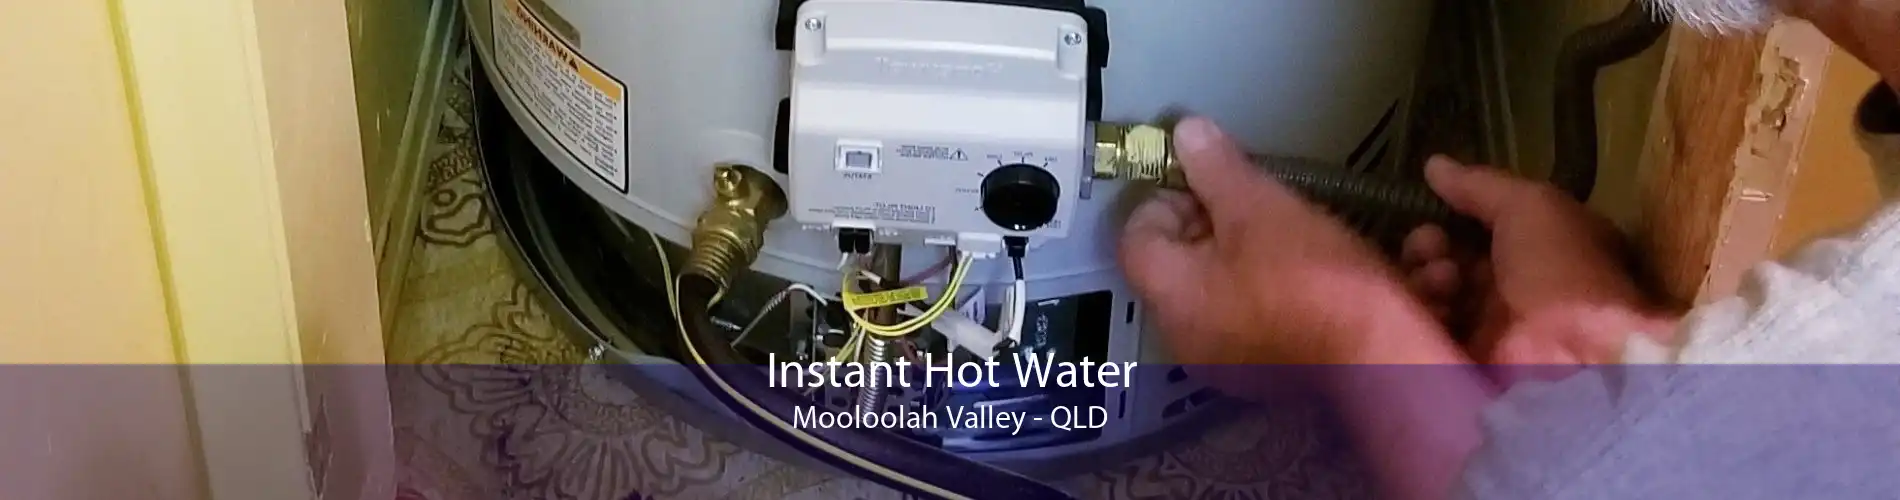 Instant Hot Water Mooloolah Valley - QLD